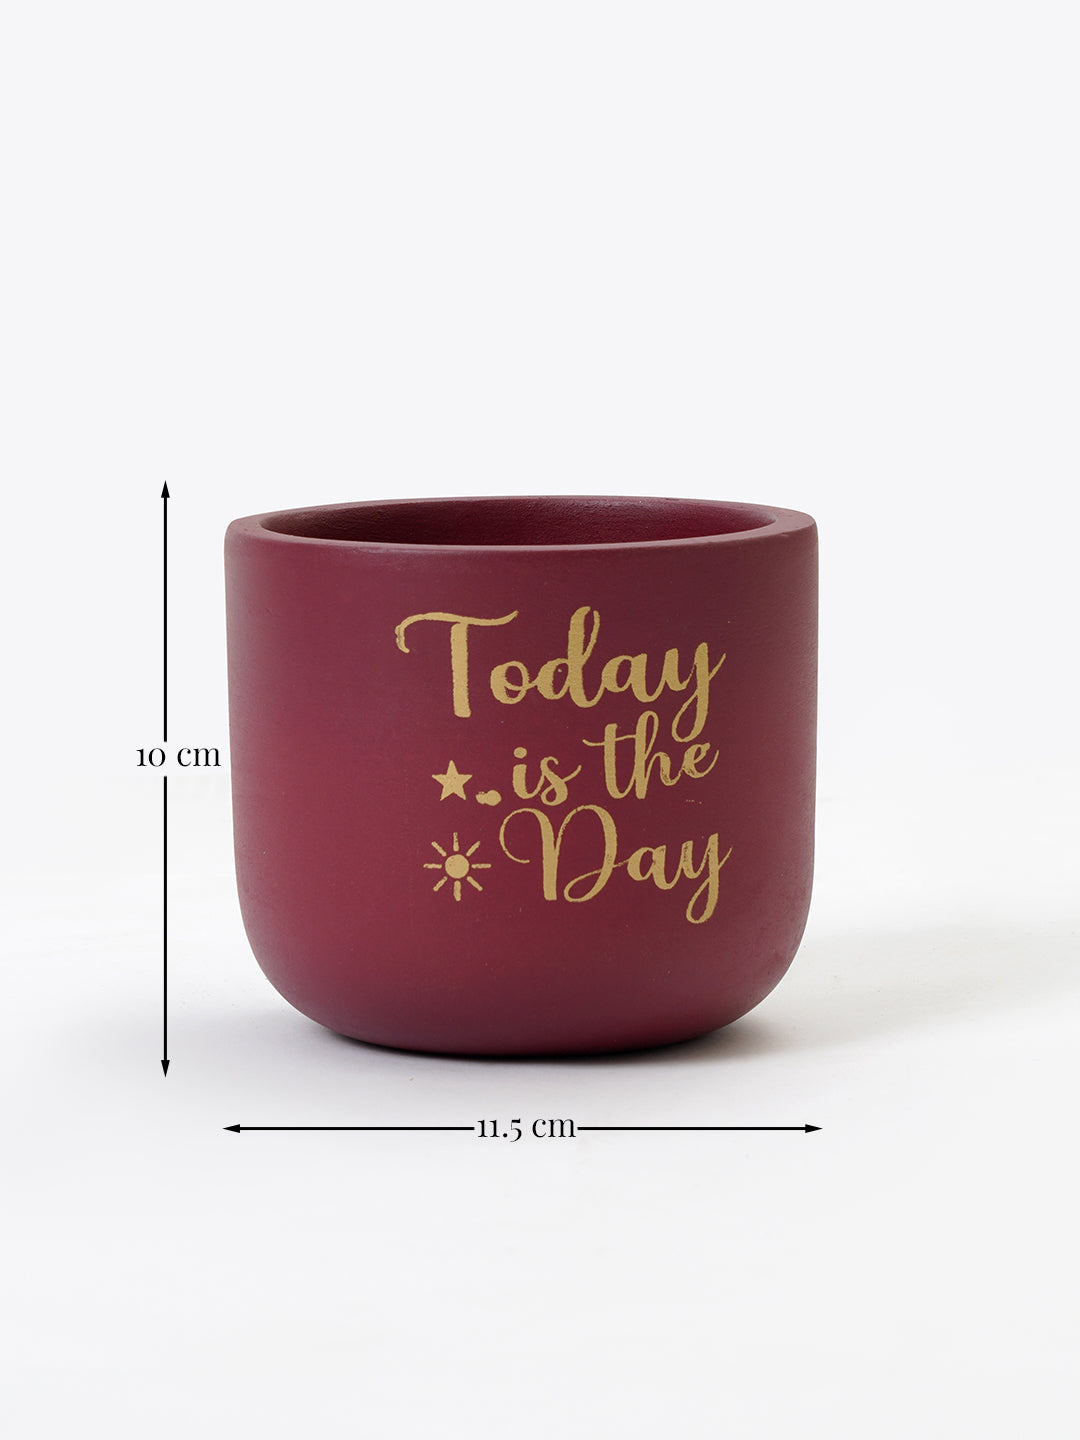 Daisy- Today is the Day Planter